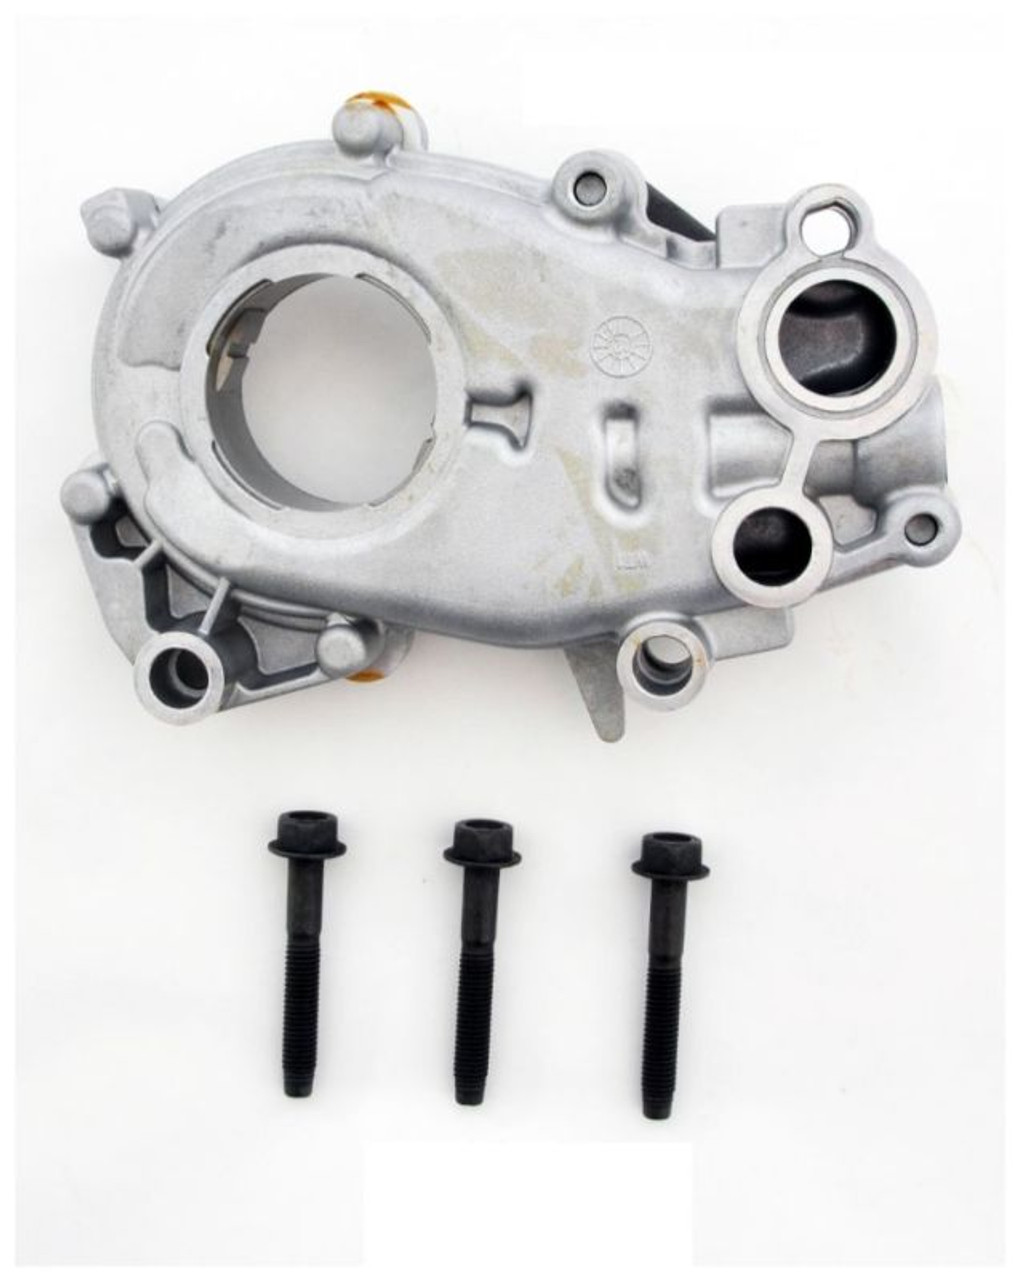 2013 Cadillac CTS 3.0L Engine Oil Pump EP353 -79